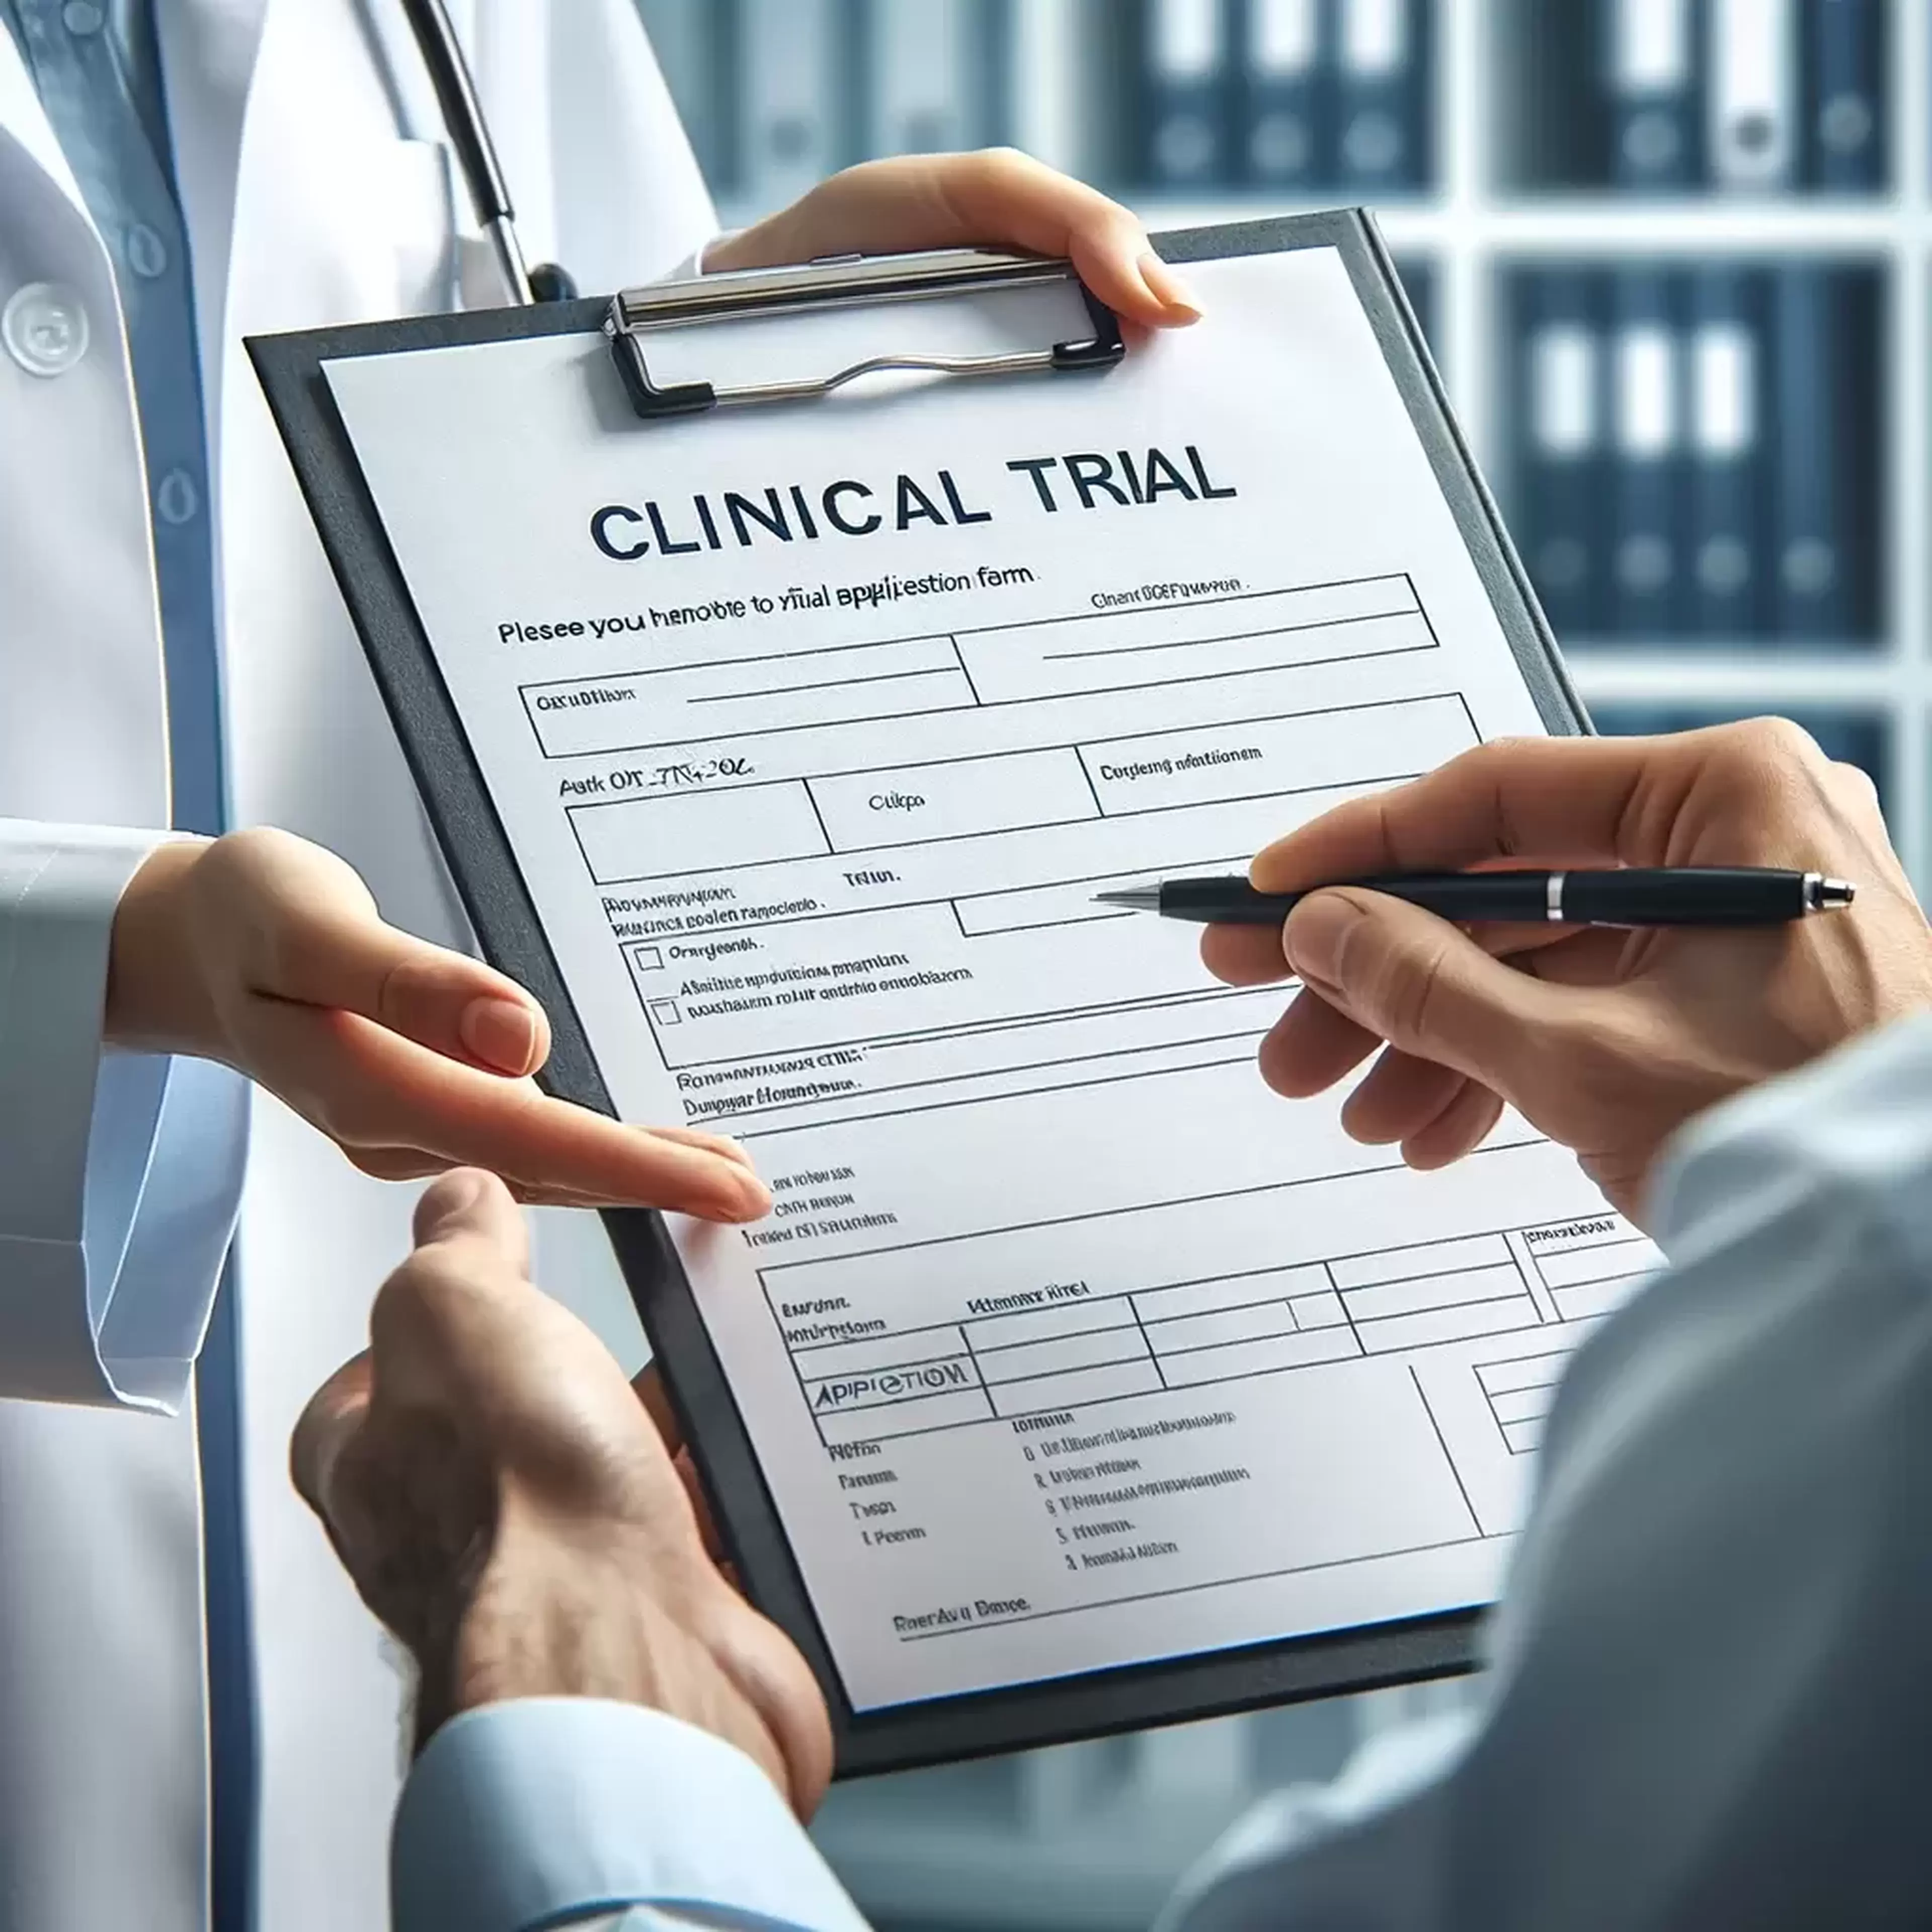 December 2022 - First Clinical Trial Application Submitted